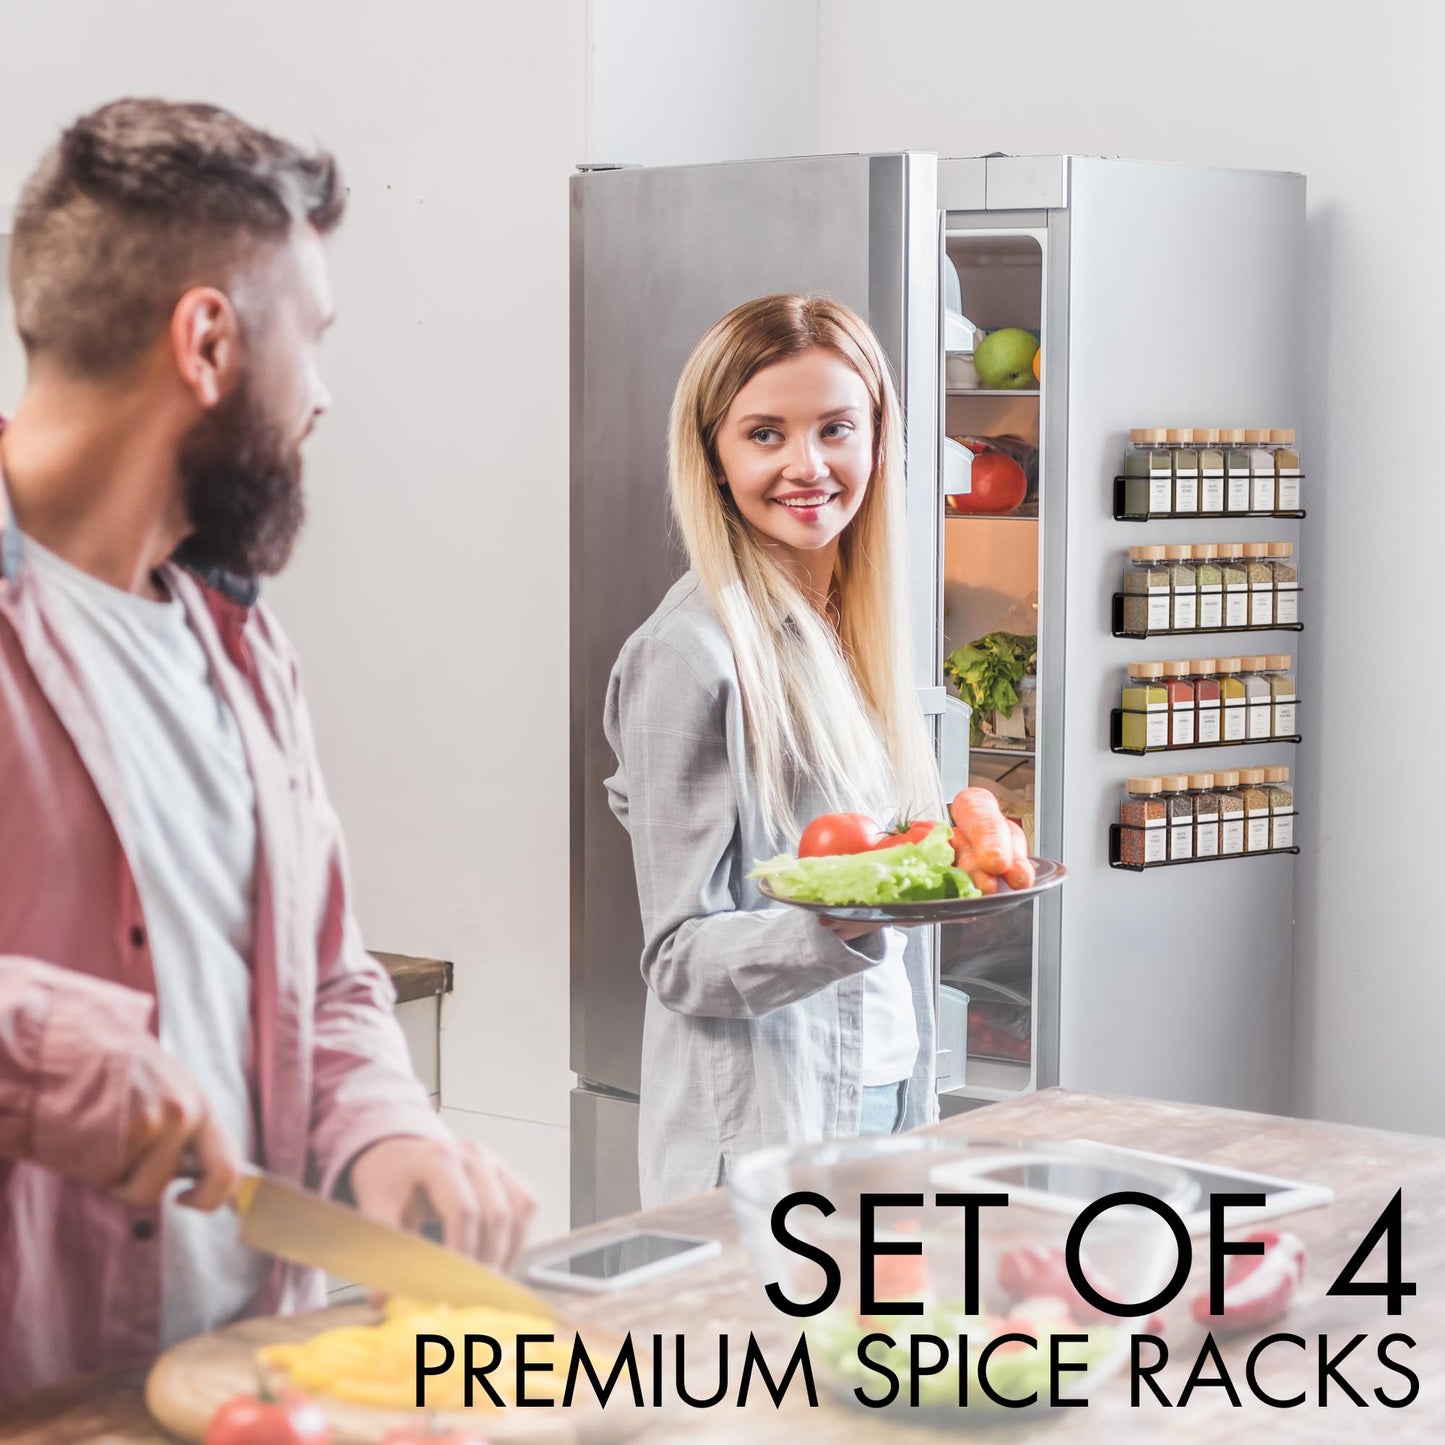 ZICOTO Magnetic Spice Racks for Your Refrigerator - 4 Space Saving Shelves Safely Hold Up to 24 Jars with Extra Strong Magnets - The Perfect Seasoning Storage Organizer For The Fridge